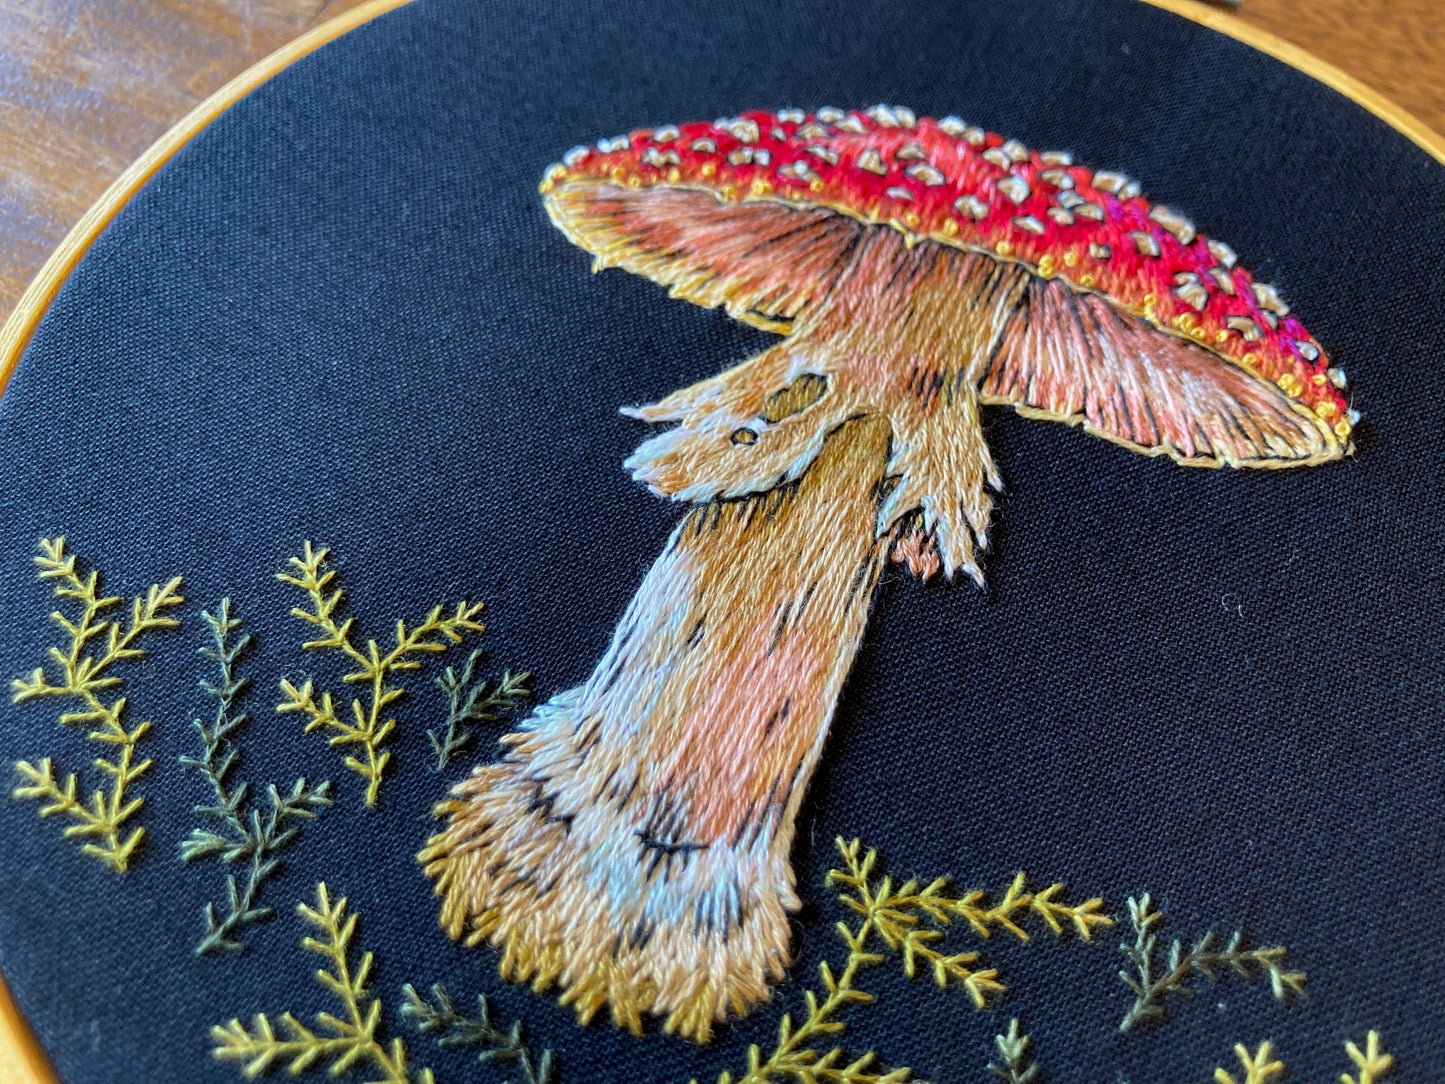 an embroidered mushroom with a spotted red cap and a shaggy stem stands among green embroidered moss on a black fabric in a round gold hoop